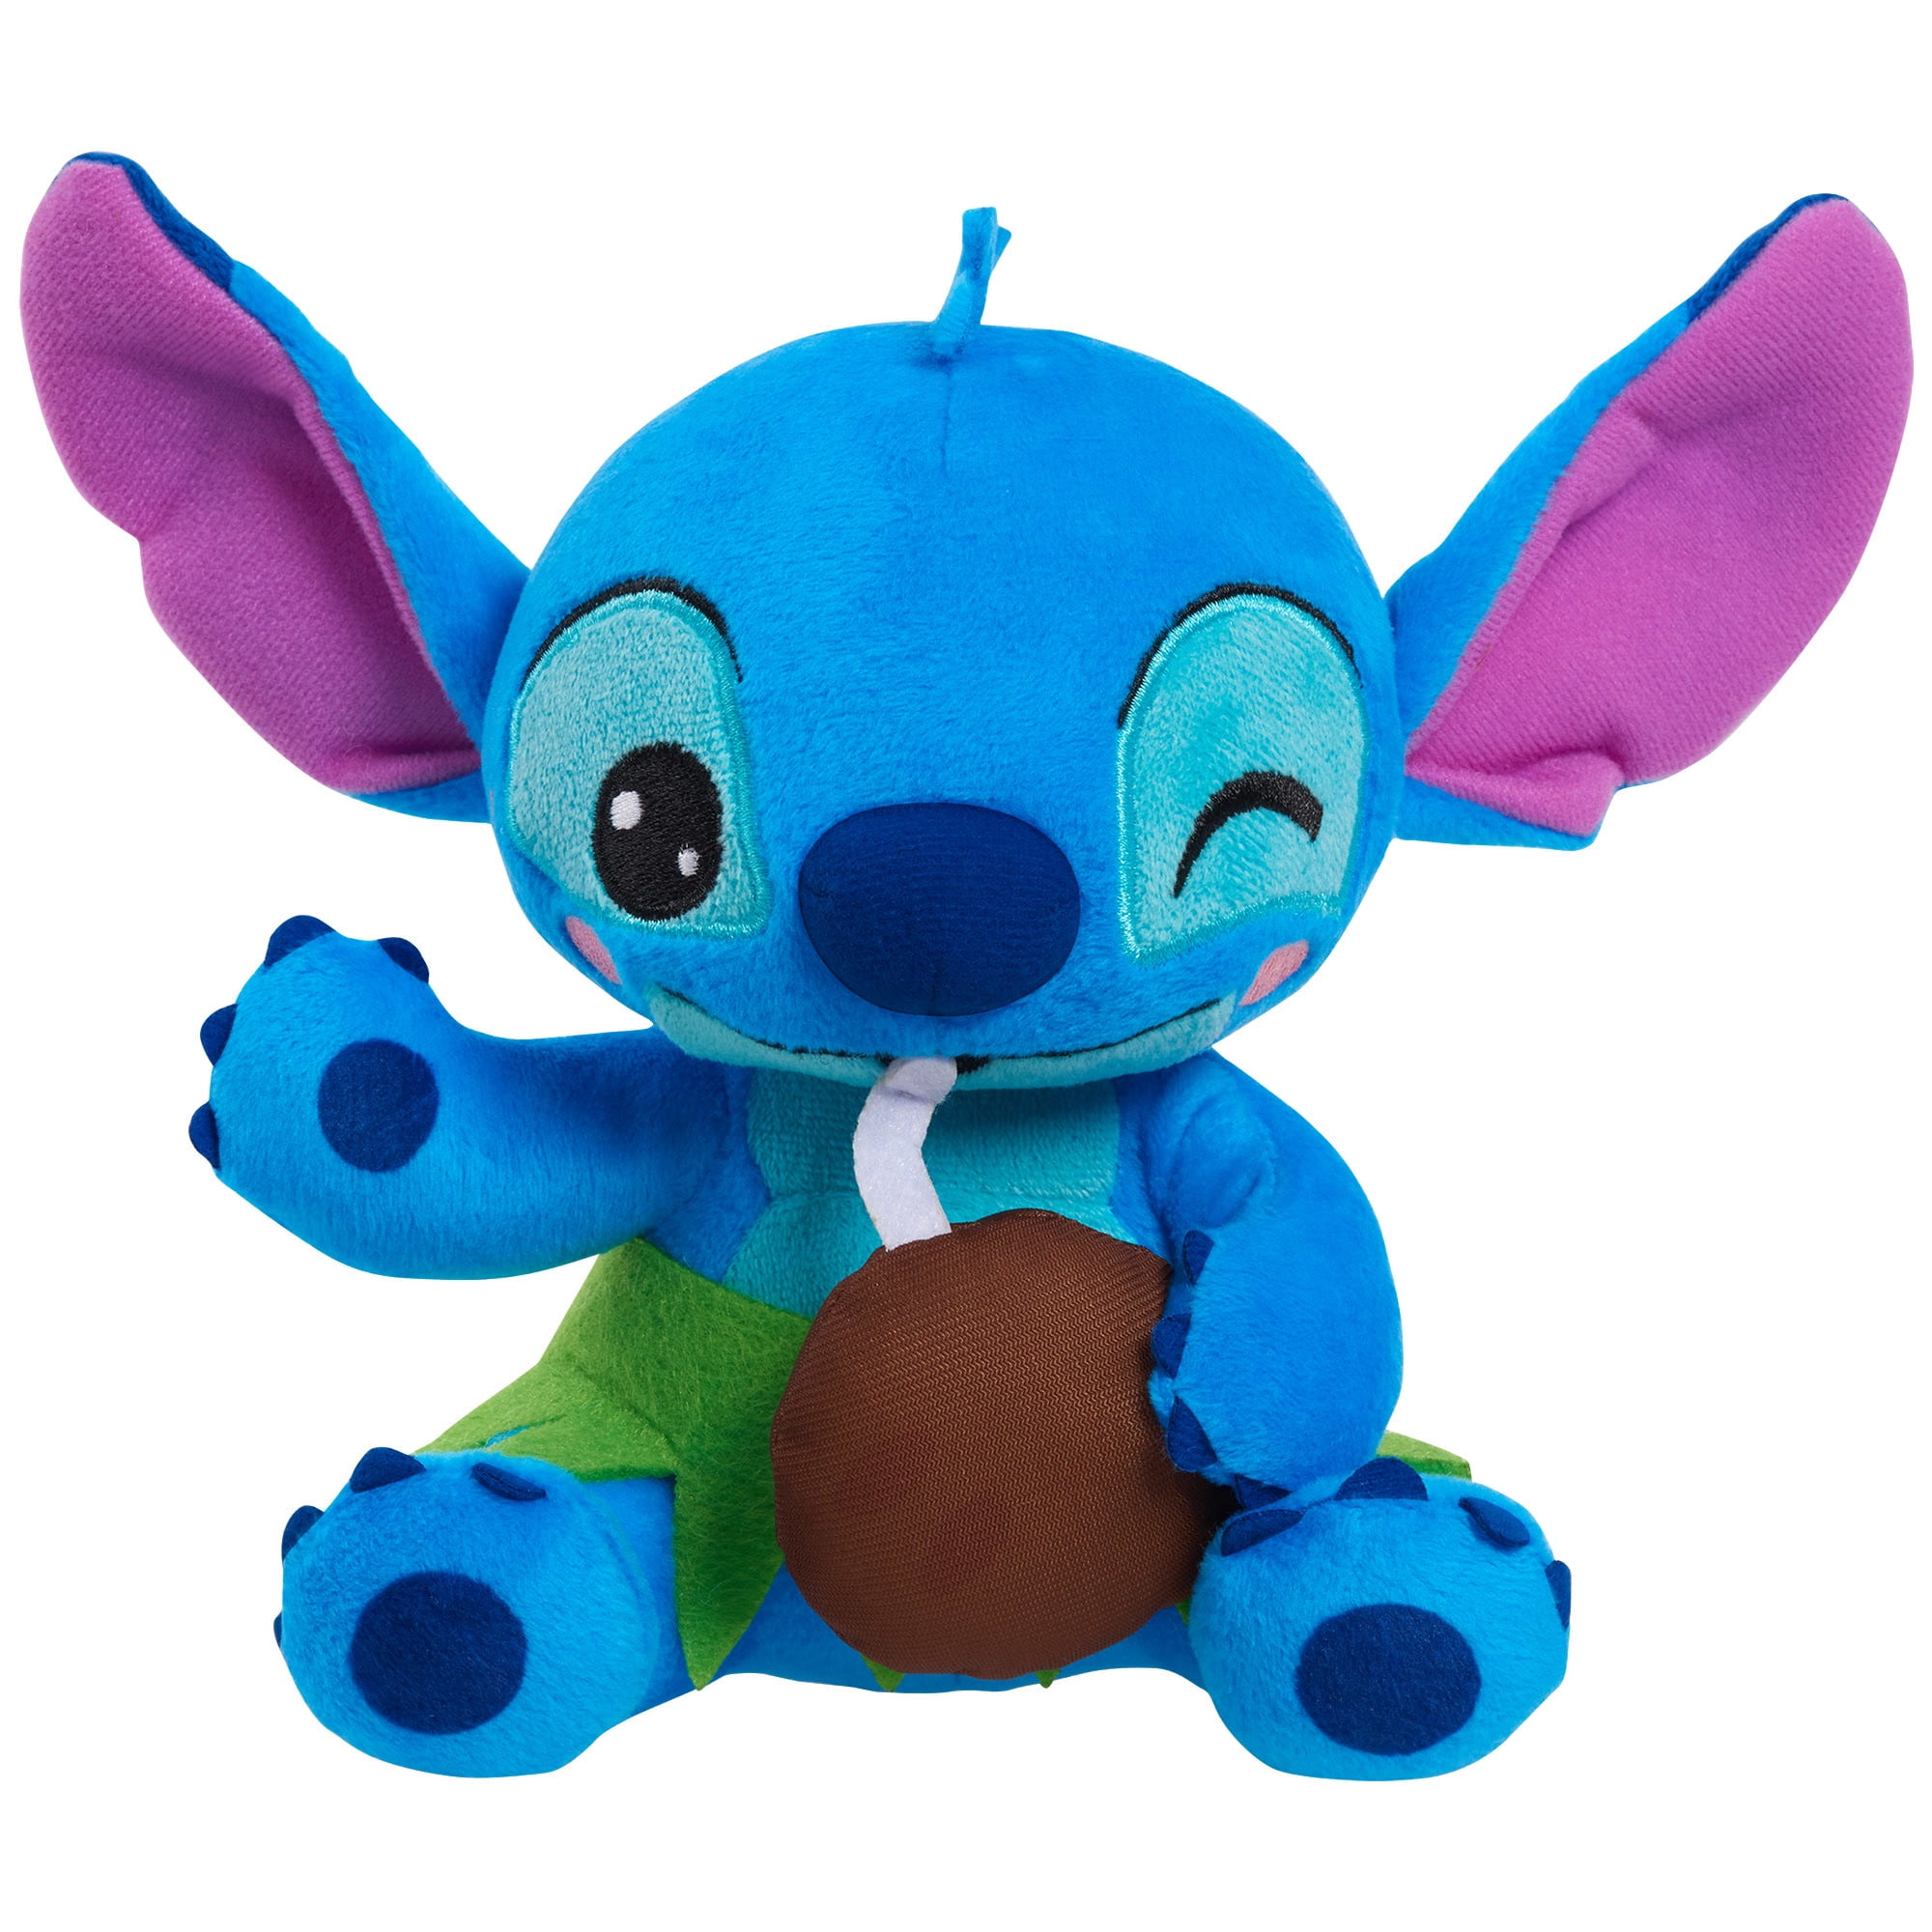 Disney Stitch Small Plush Stitch and Coconut, Stuffed Animal, Blue, Alien,  Officially Licensed Kids Toys for Ages 2 Up, Easter Basket Stuffers and